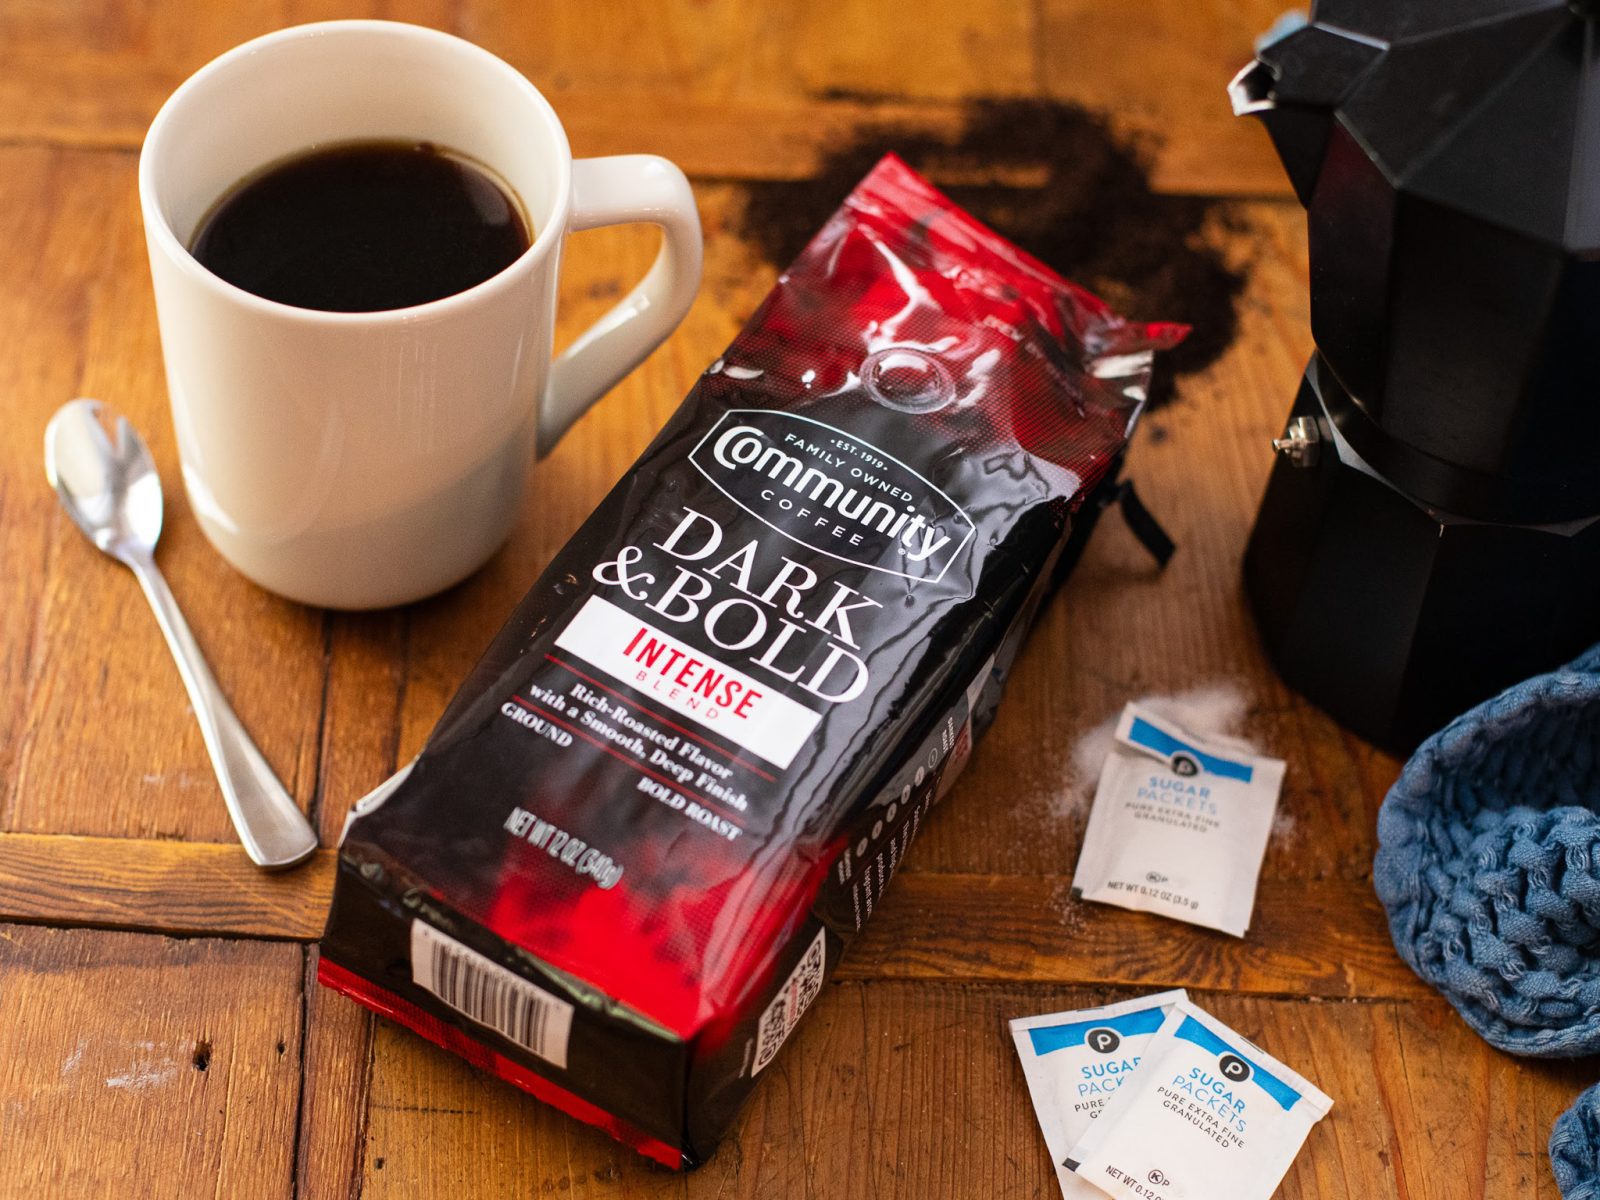 Get The Bags/Boxes Of Community Coffee Dark & Bold For Just $4.49 At Kroger (Regular Price $9.99)